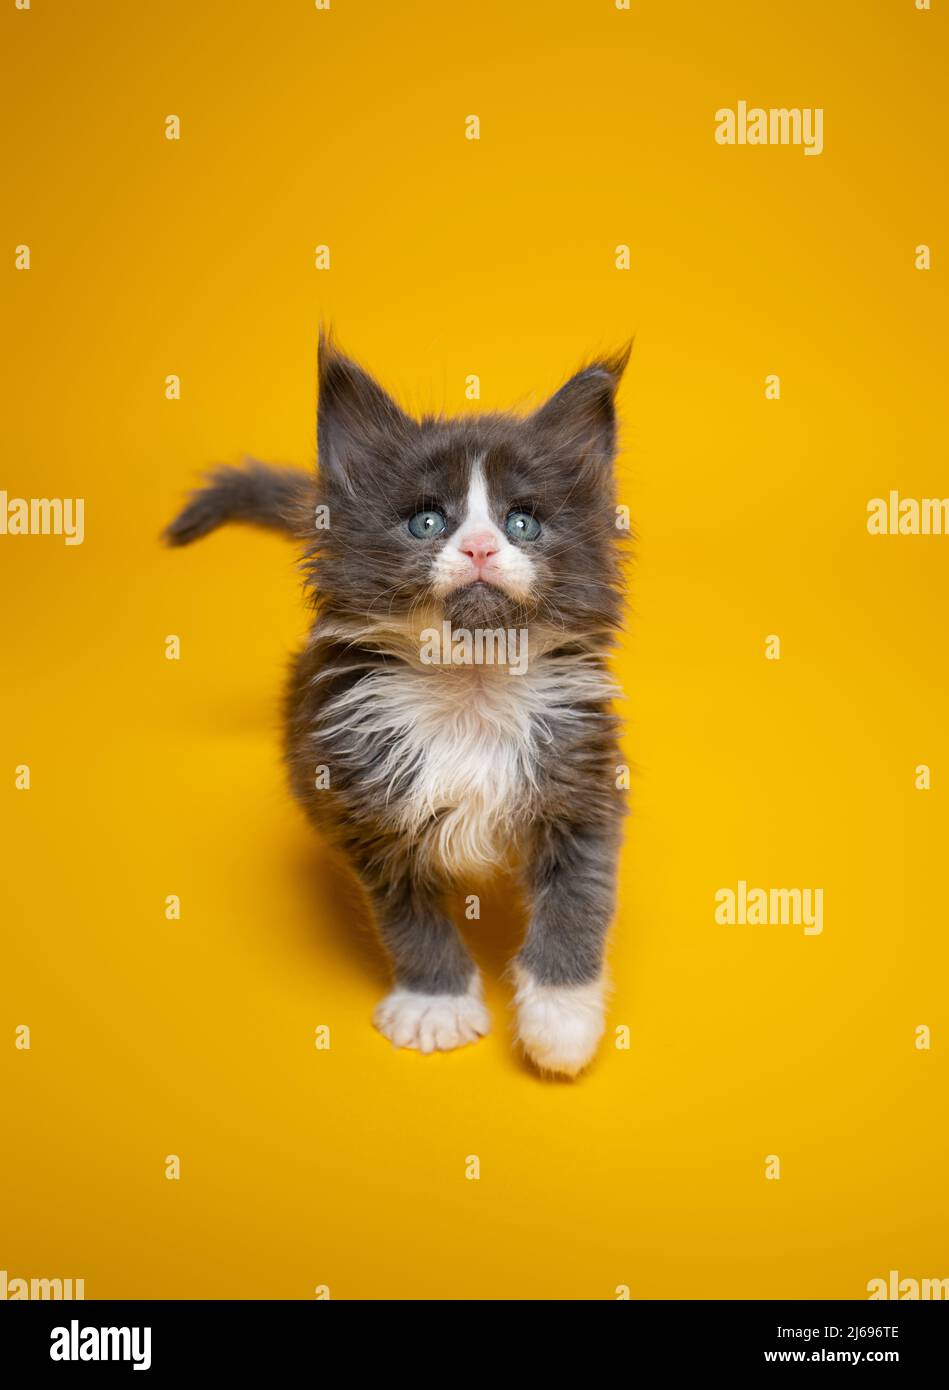 curious blue white tuxedo maine coon kitten looking up on yellow background Stock Photo